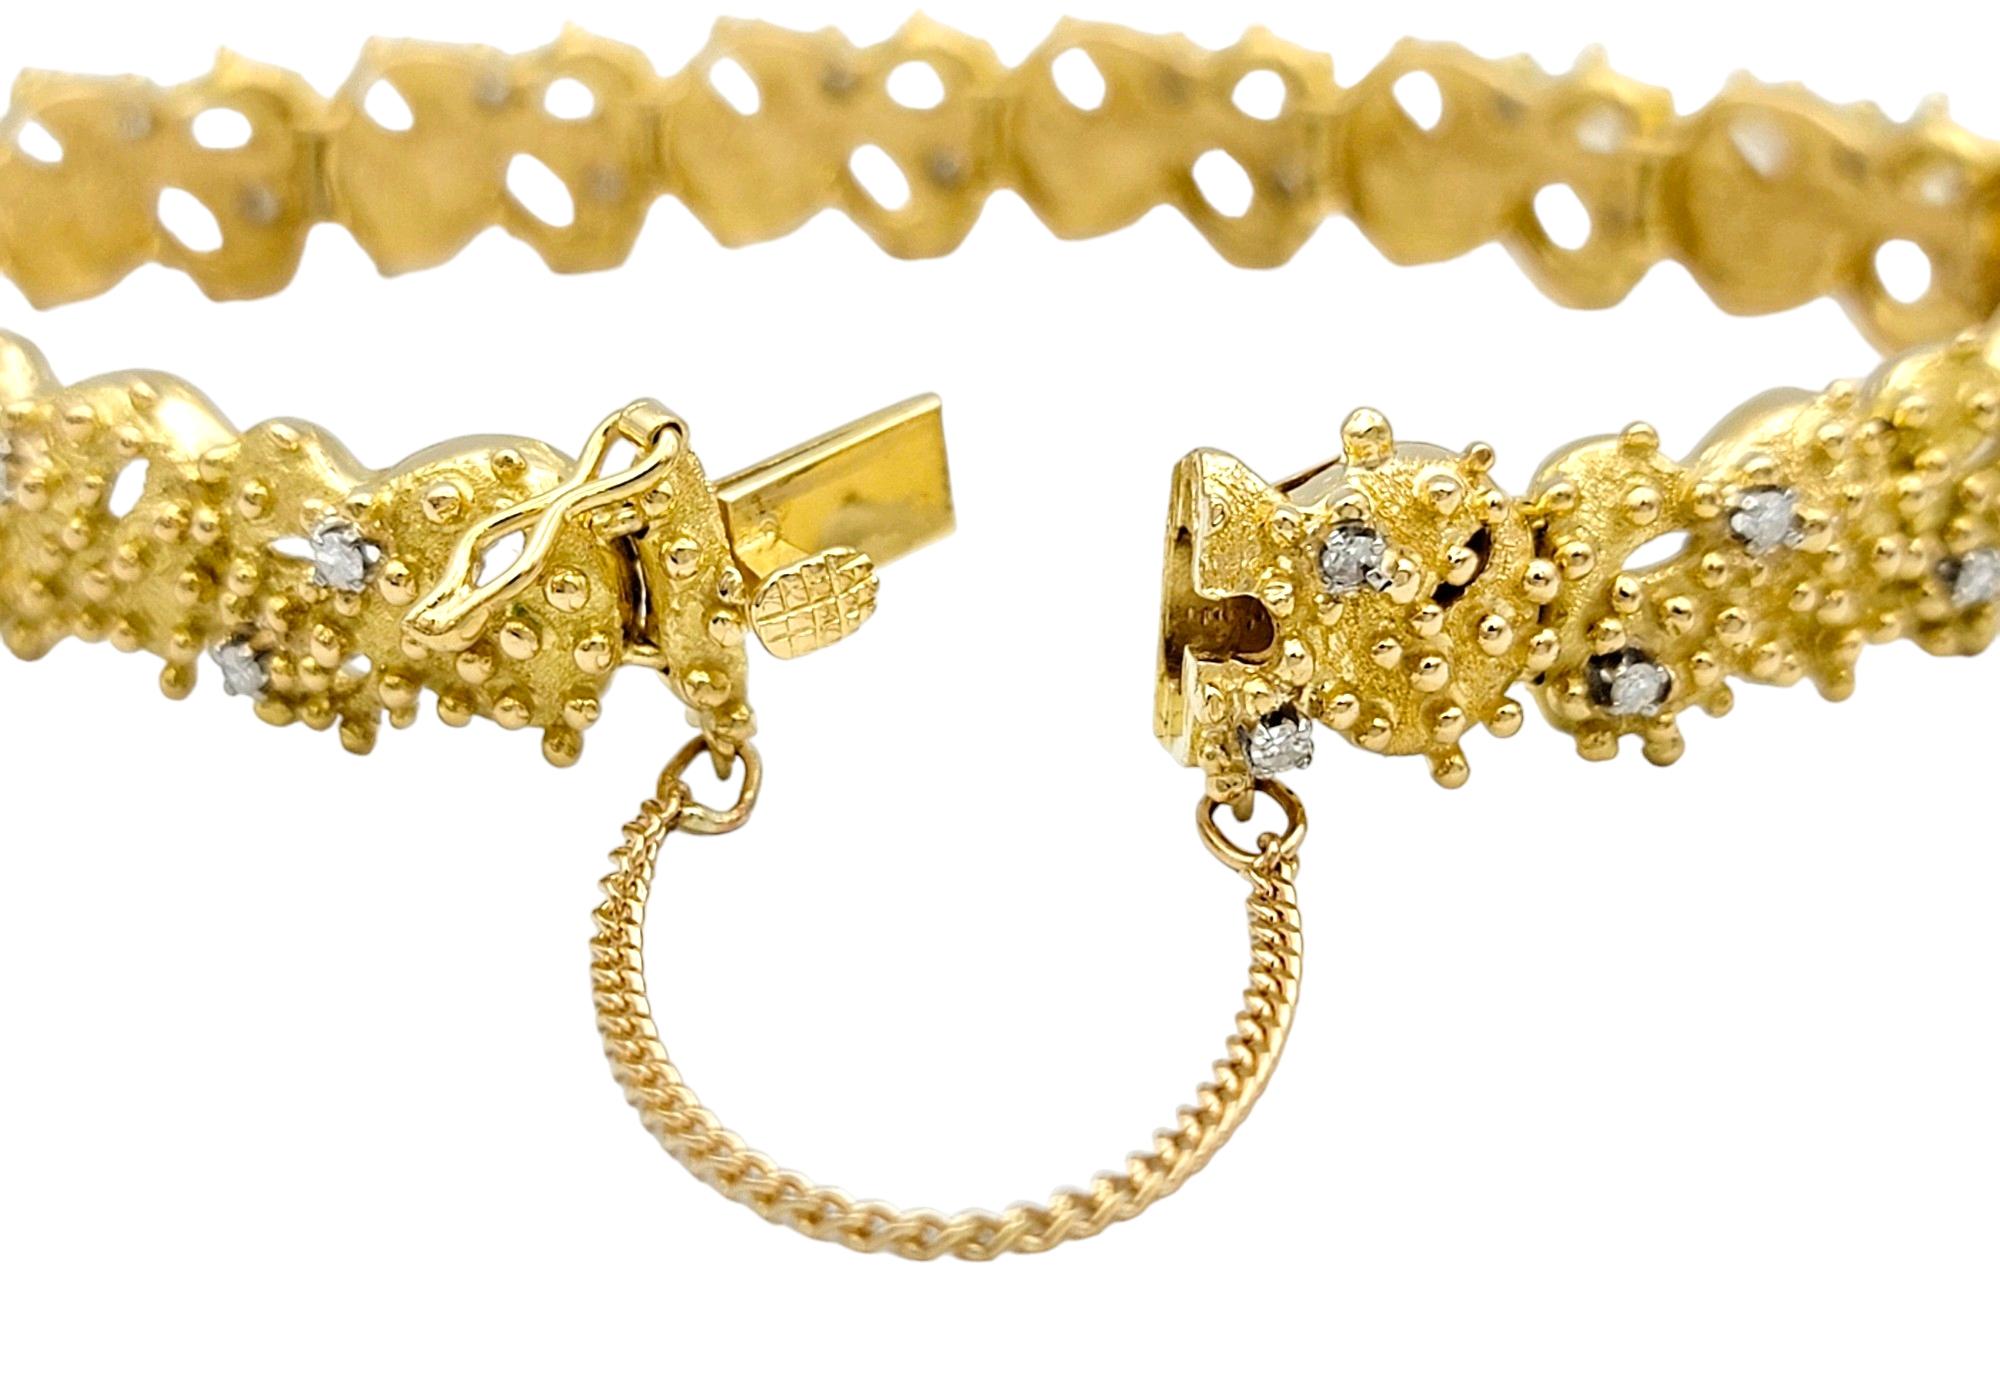 J. Rossi Diamond Link Bracelet with Granulated Design in 18 Karat Yellow Gold In Good Condition For Sale In Scottsdale, AZ